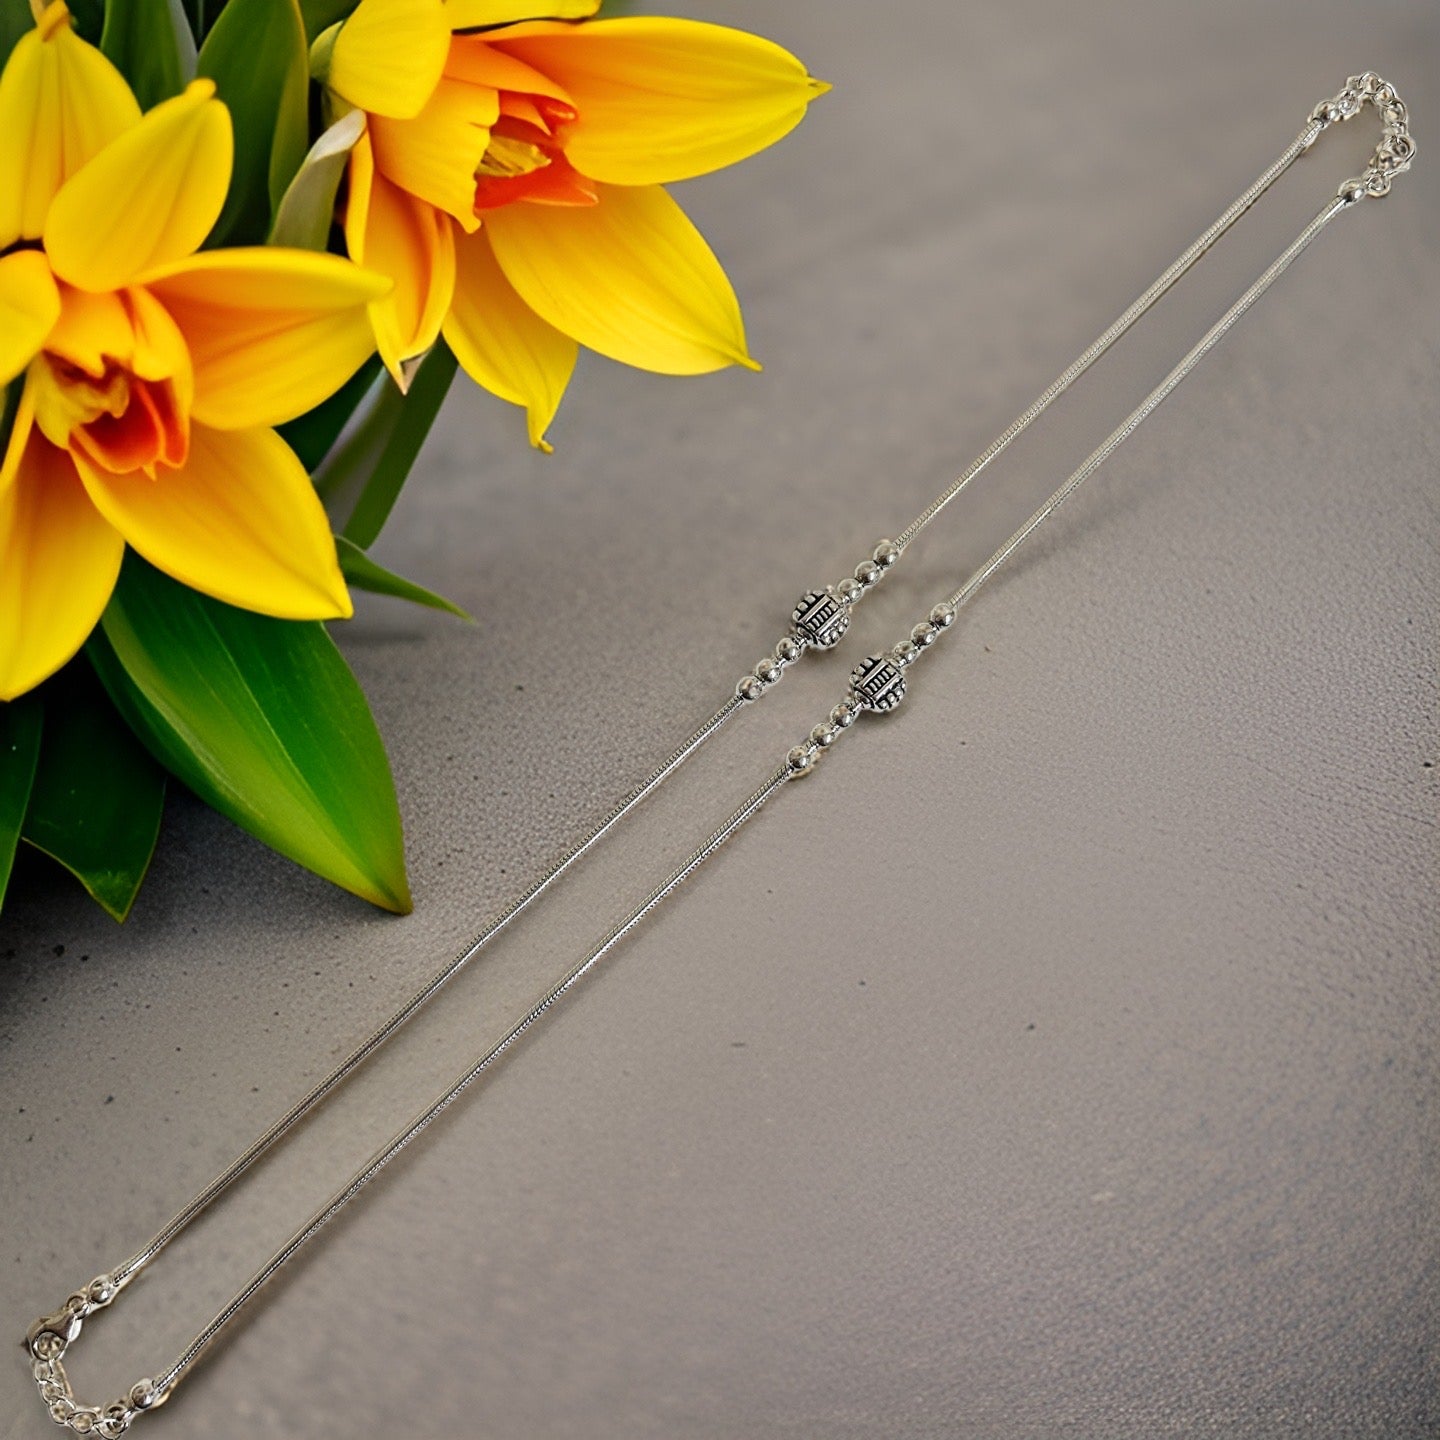 925 Silver Slider Bead Anklet 10+1 inches